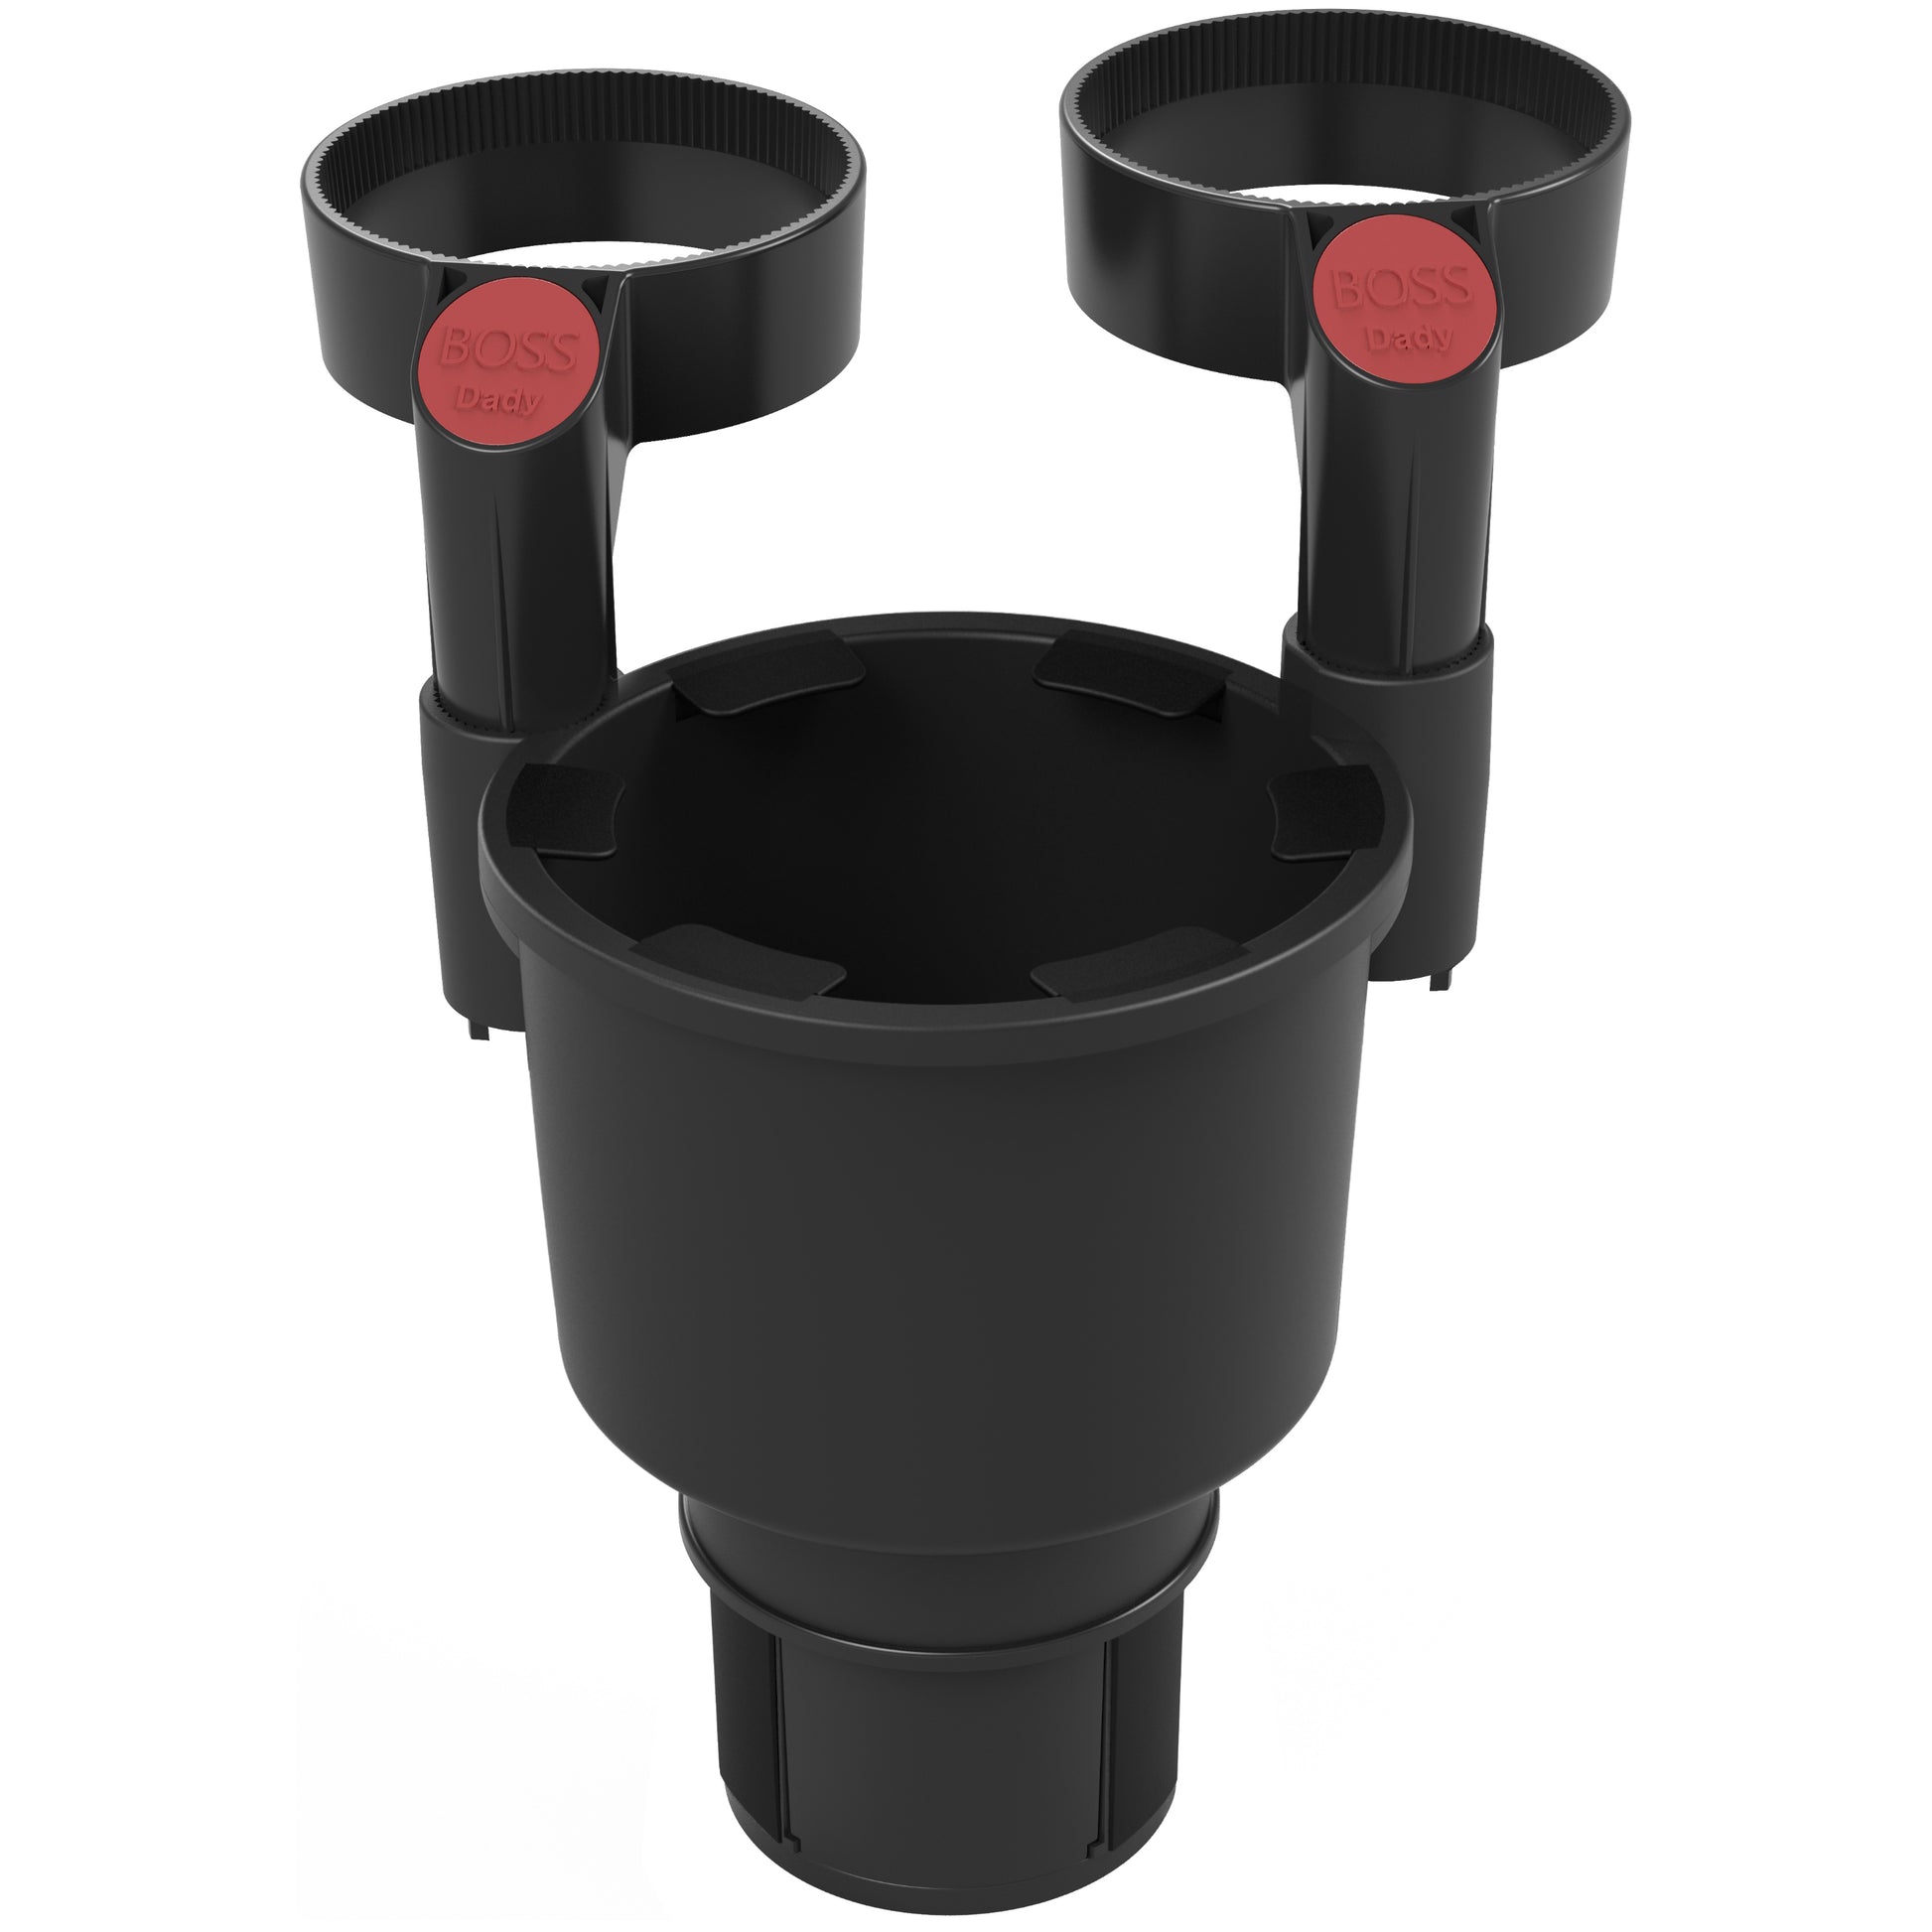 AAA.com  Goodyear Trio Cup Holder Extension